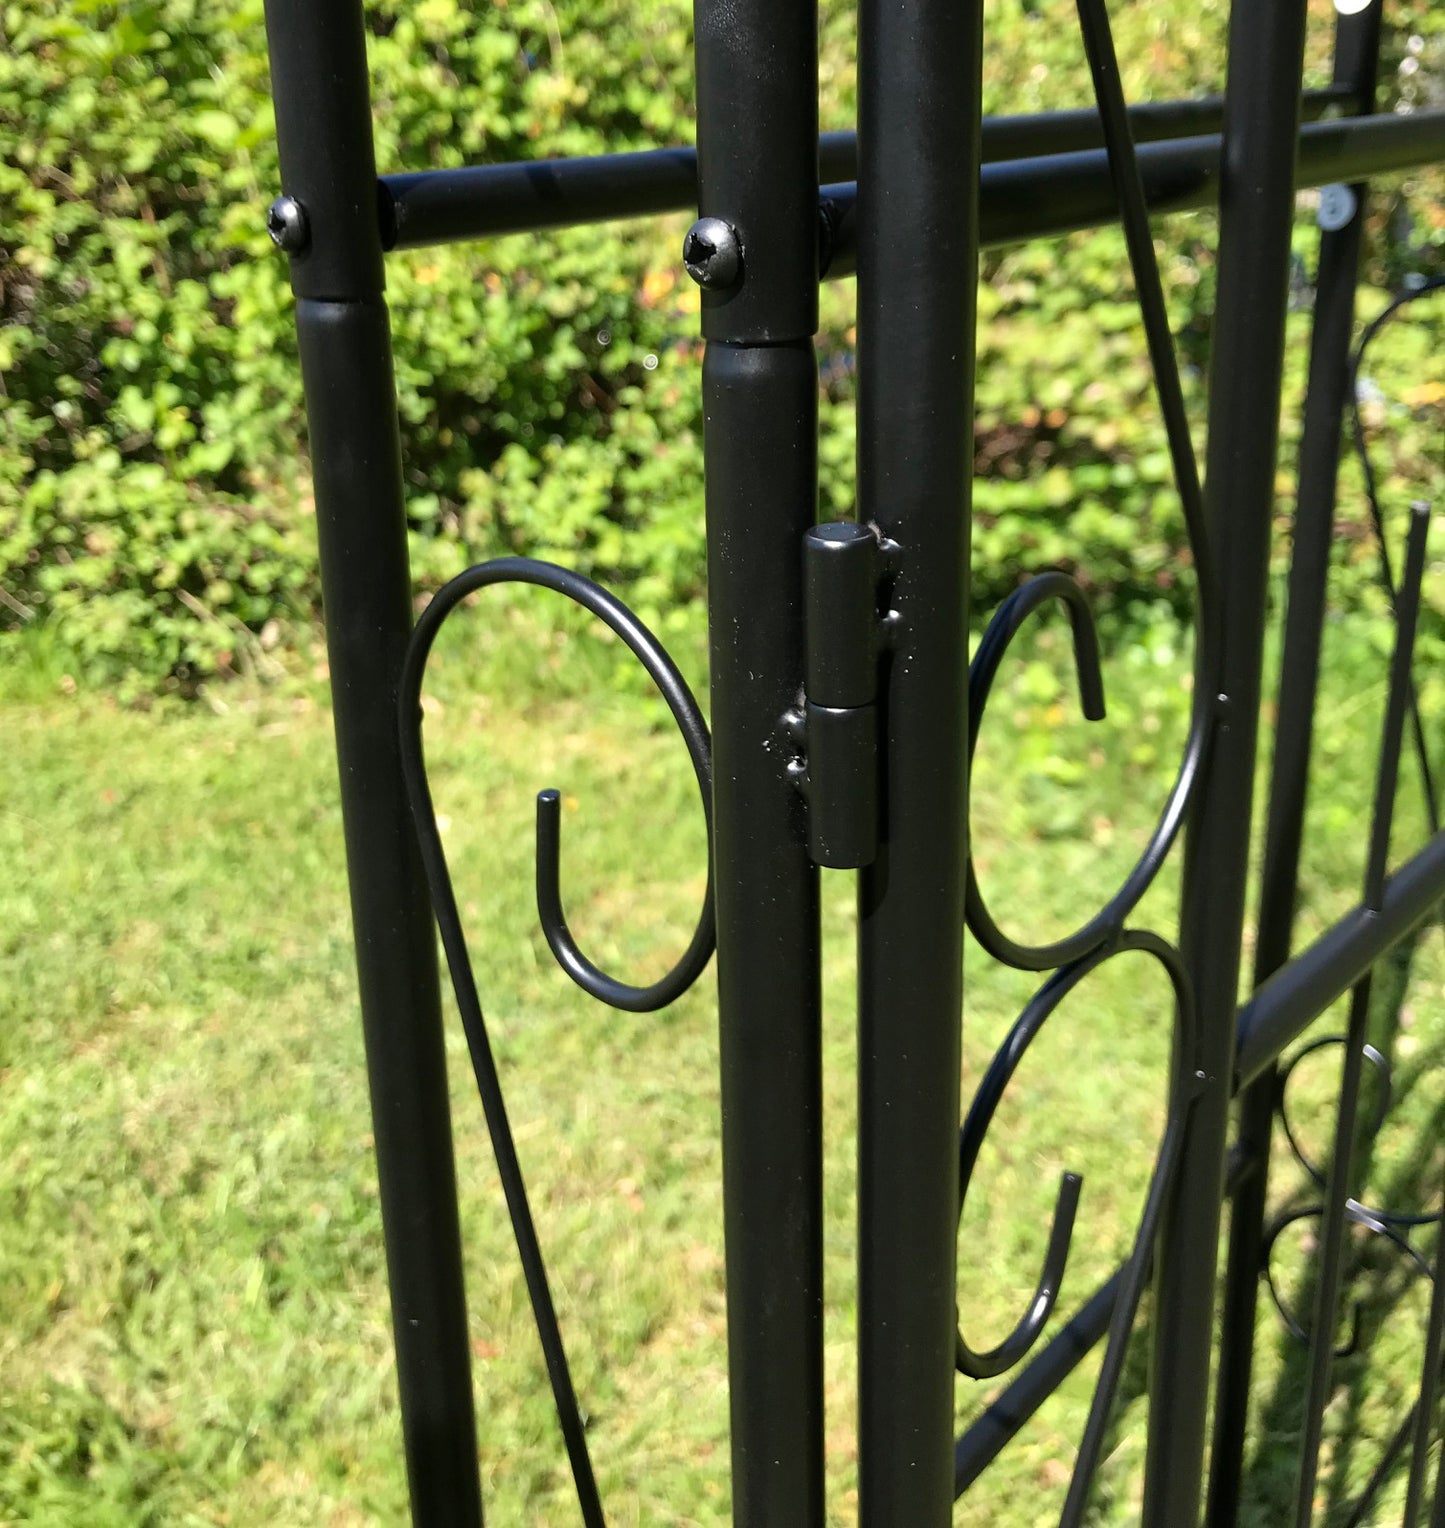 Metal Windsor Garden Arch with Gate and Fixing Pegs